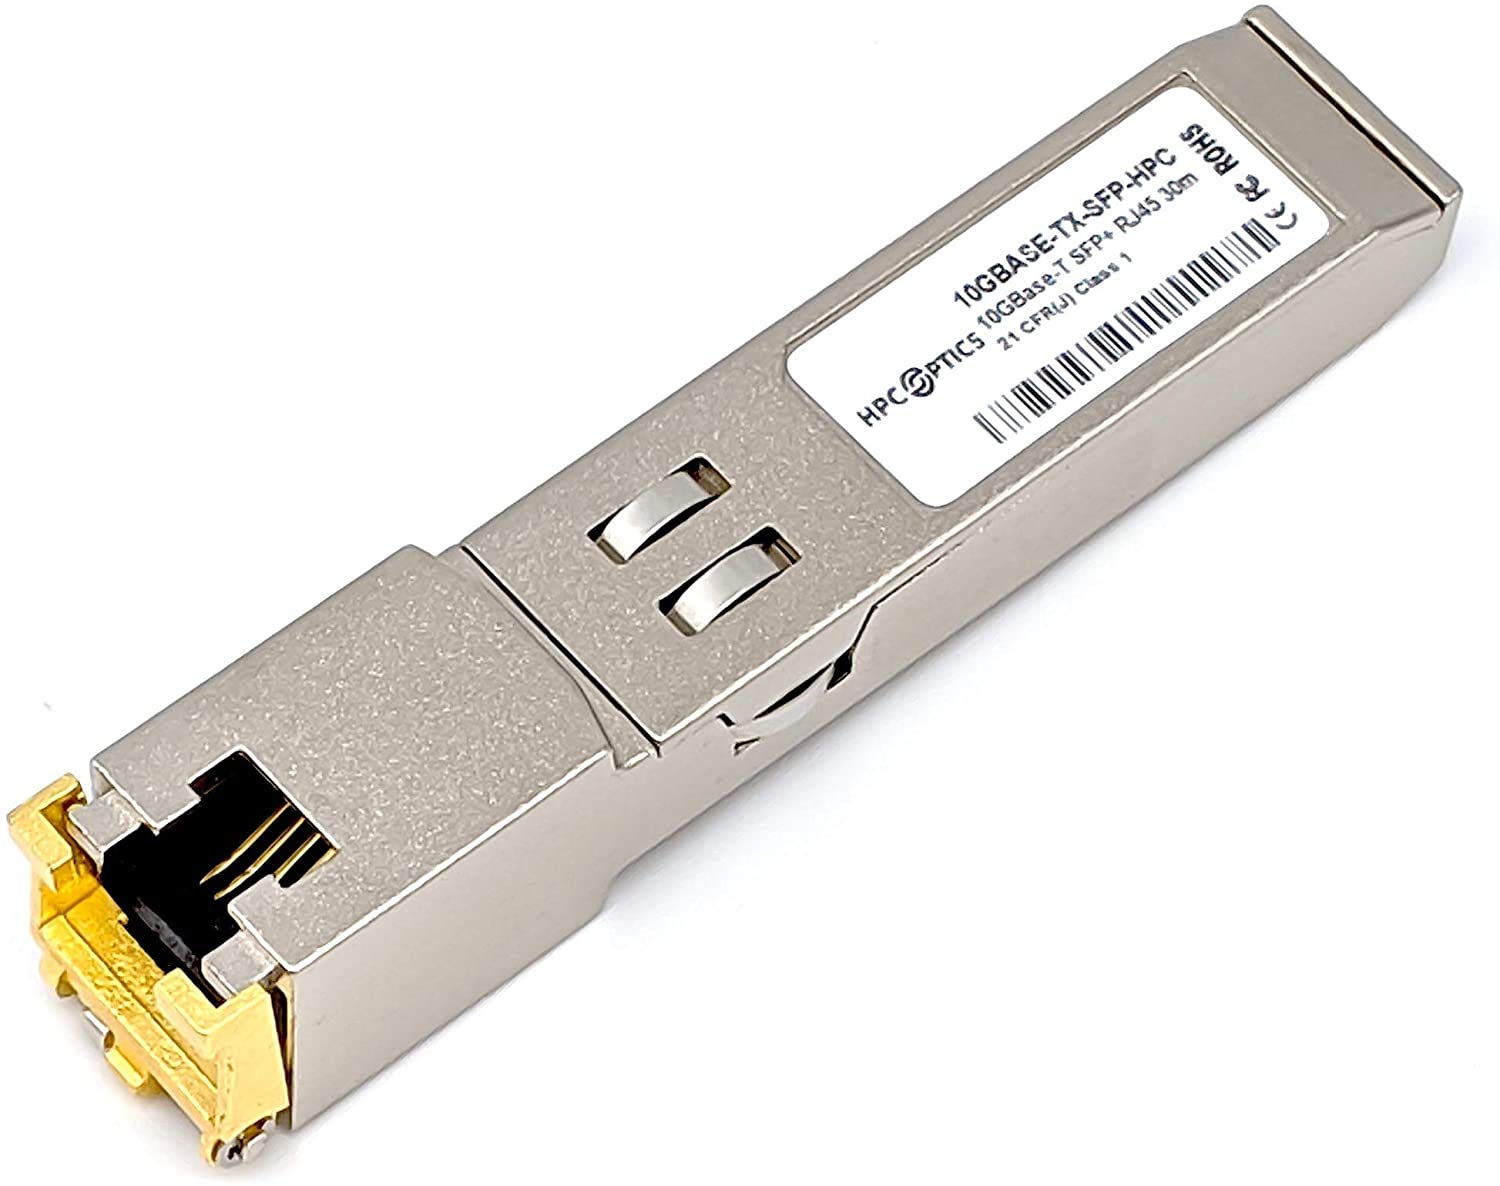 10GBASE-T SFP+ TRANSCEIVER